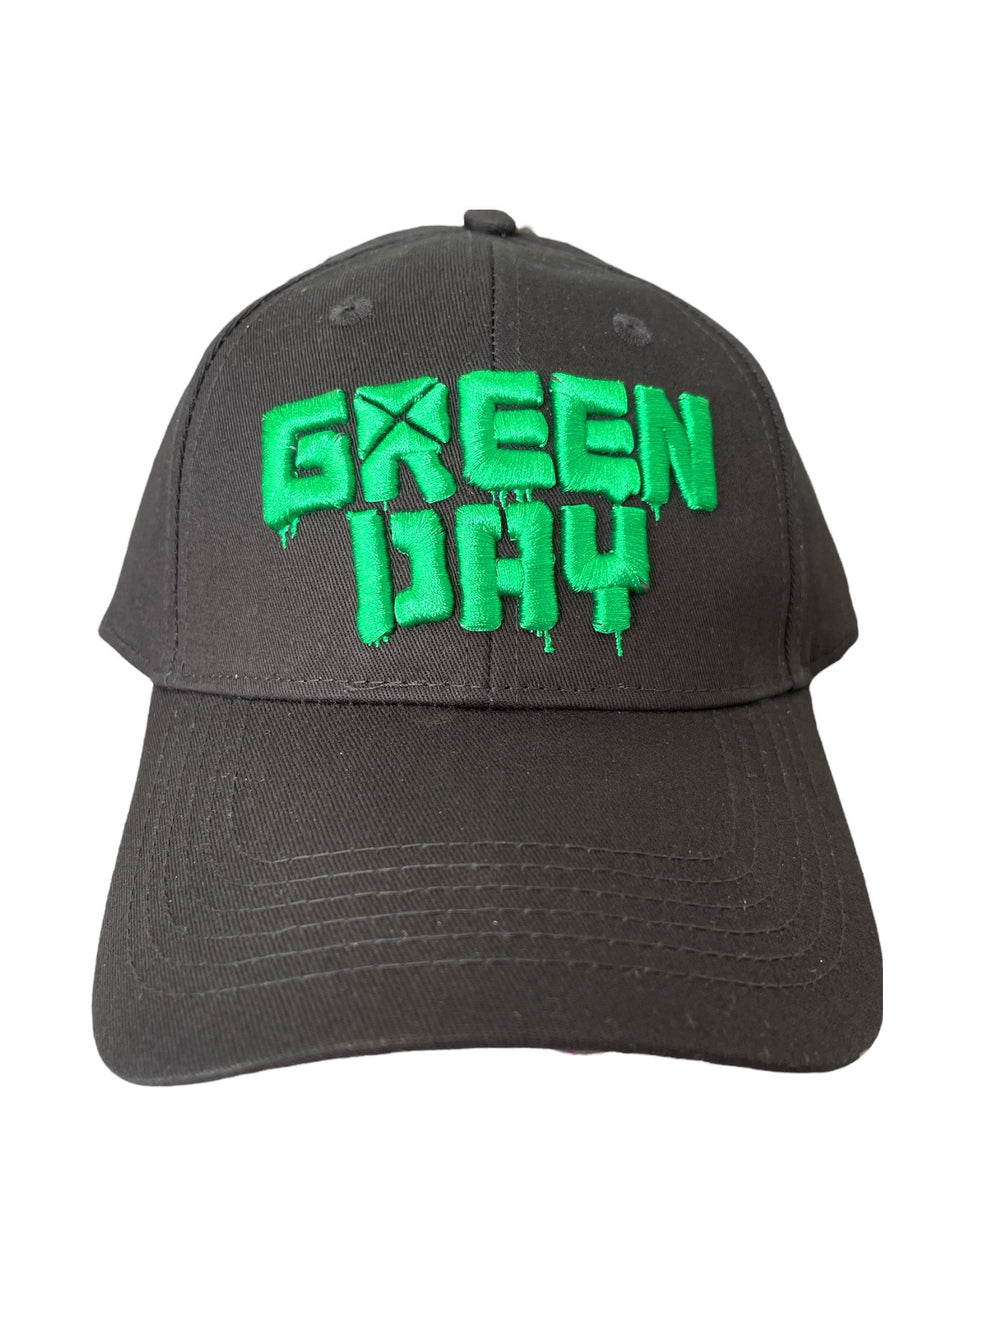 Green Day Drips Logo  Official Embroidered Peak Cap Adjustable